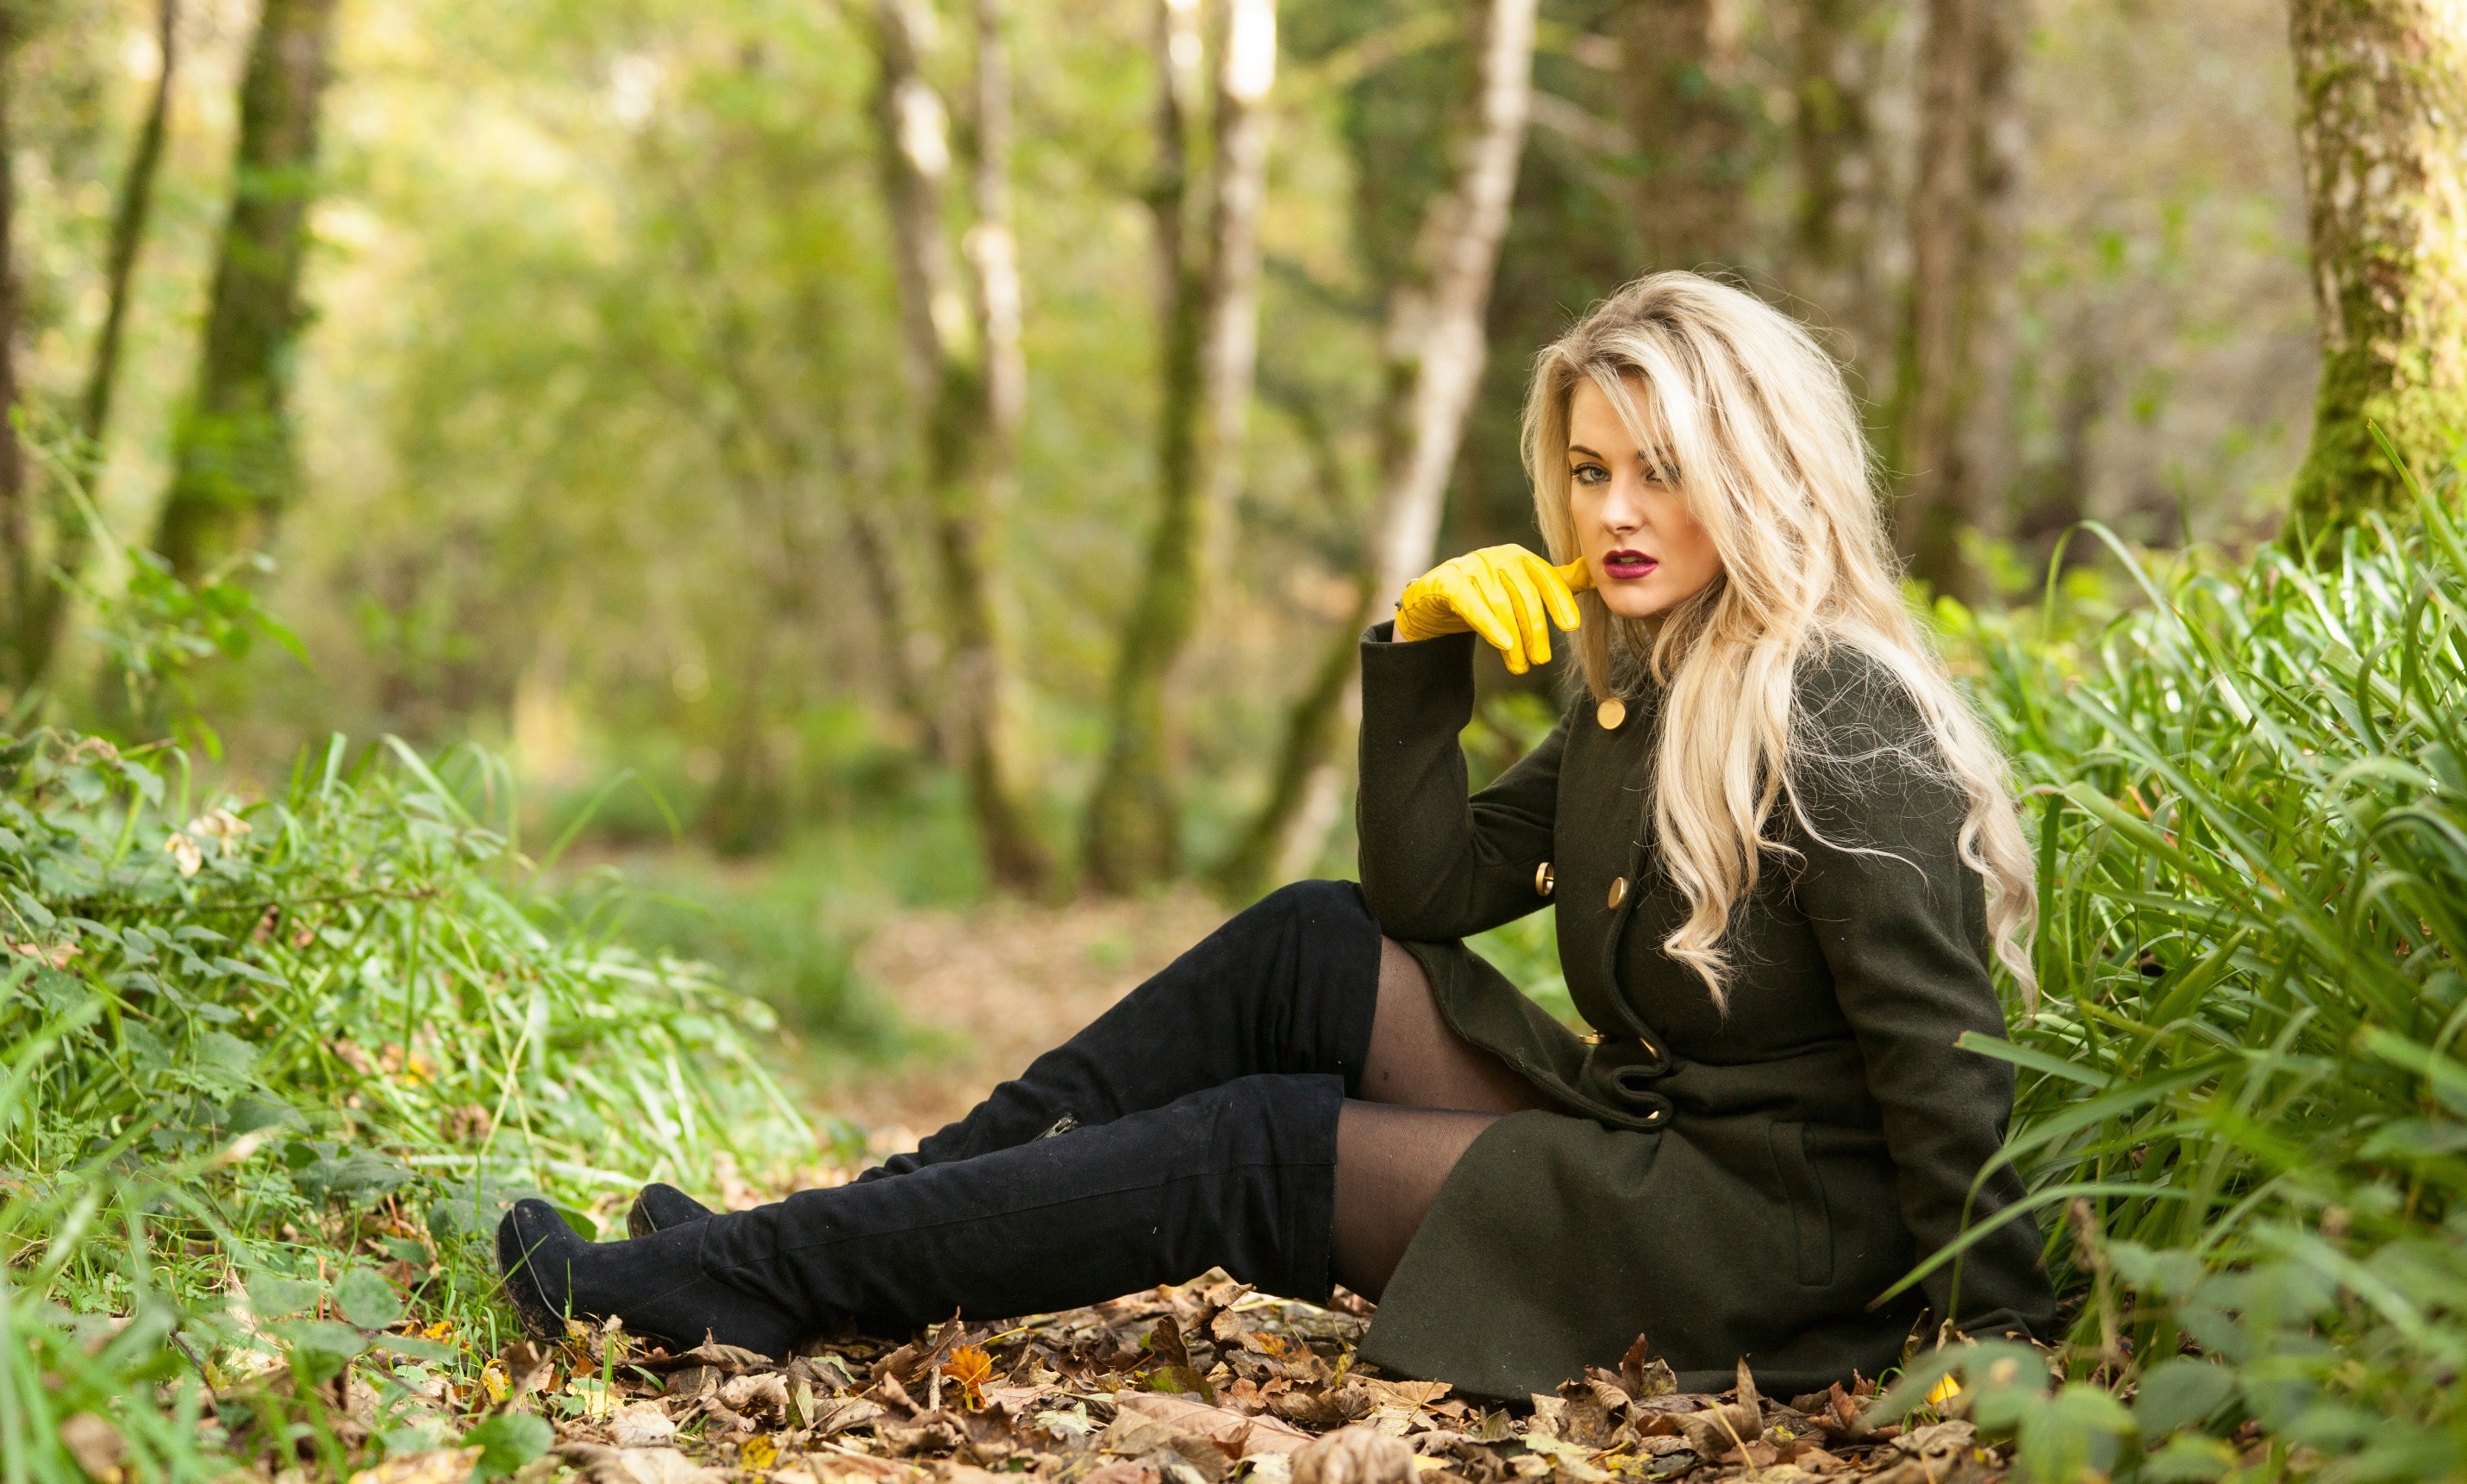 Free photo A blonde-haired girl in a green coat sits on fallen leaves